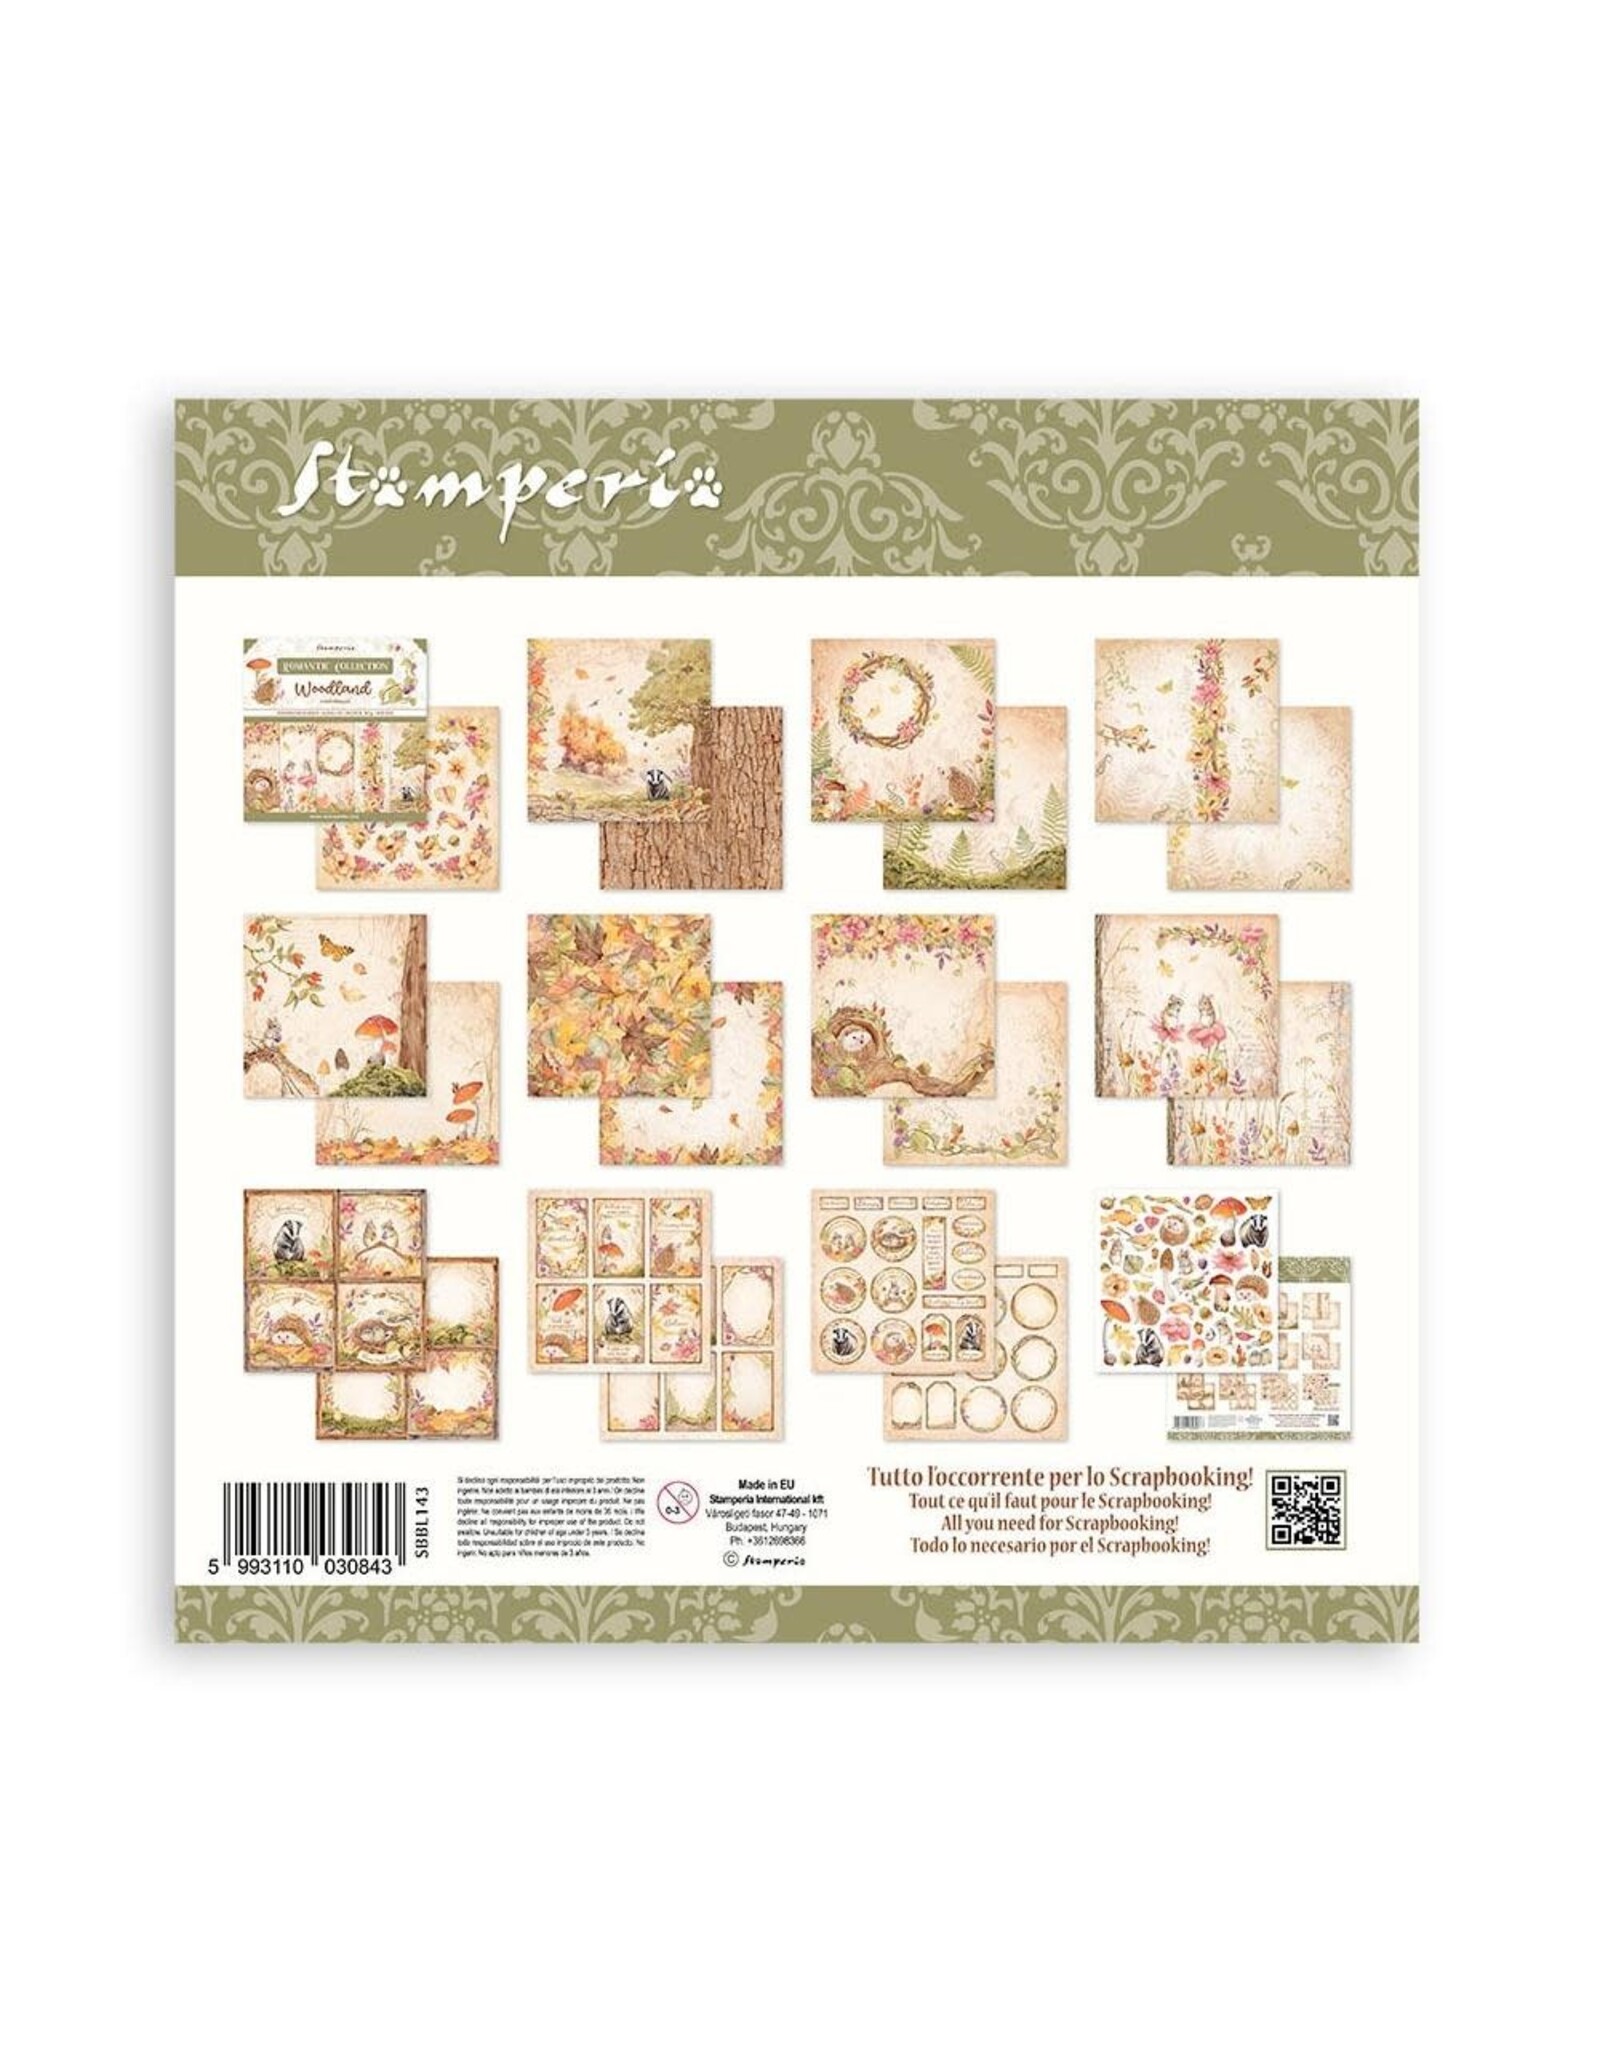 STAMPERIA STAMPERIA ROMANTIC COLLECTION WOODLAND 12X12 COLLECTION PACK 10 SHEETS